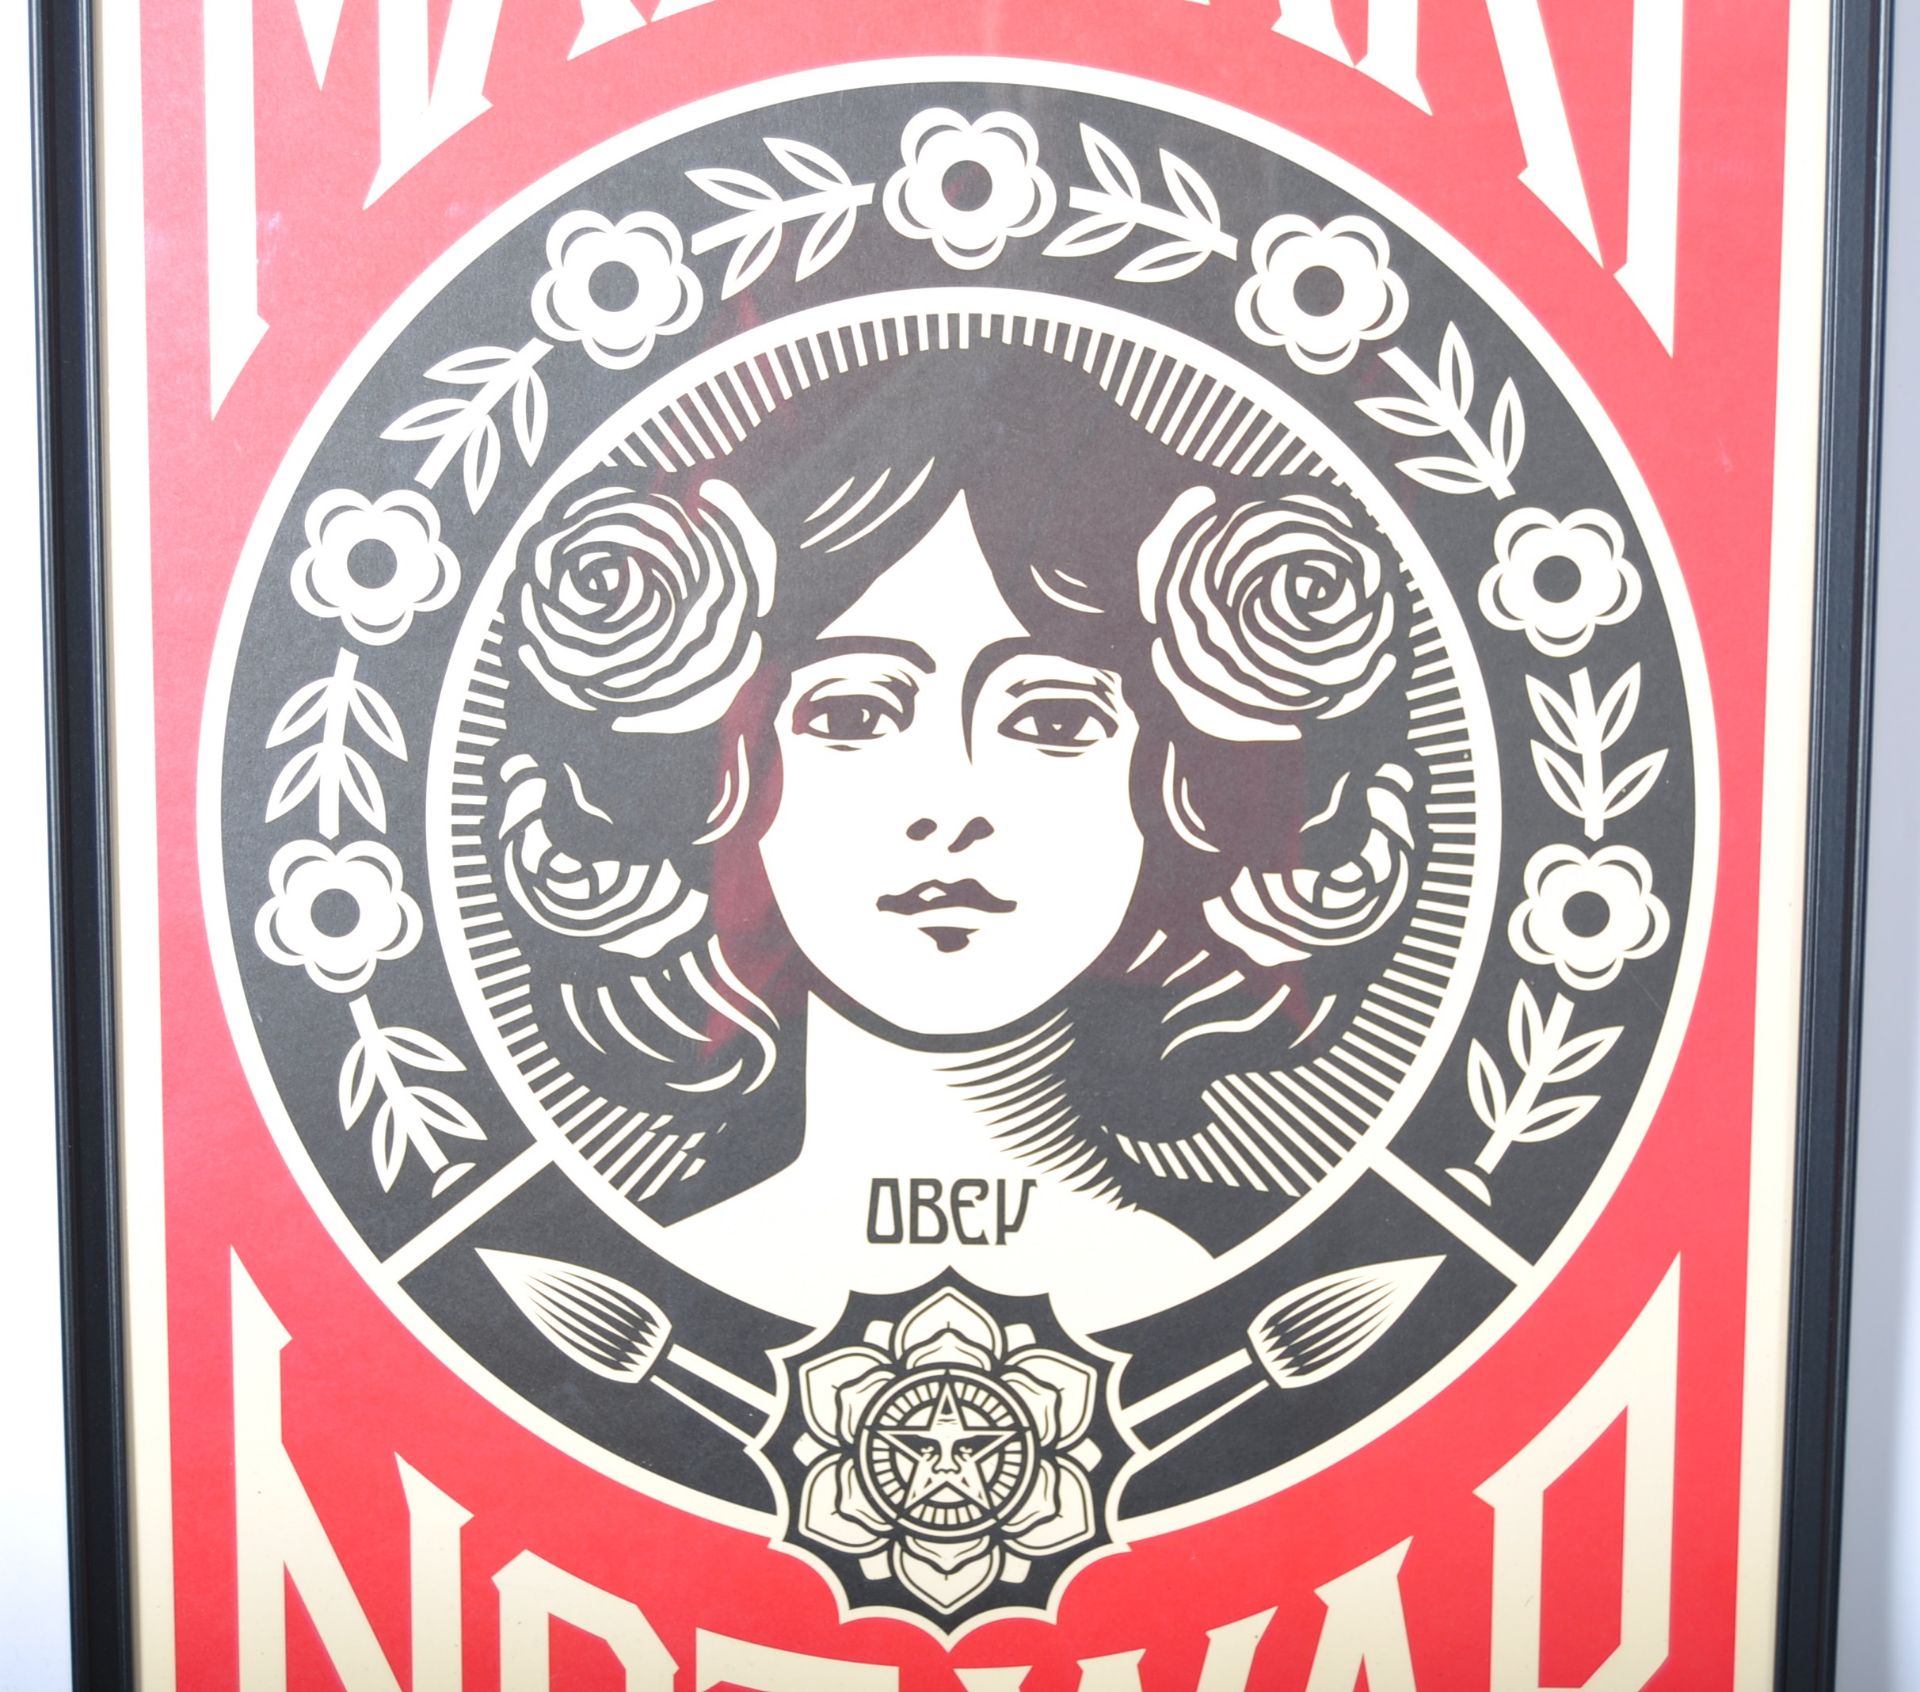 OBEY CONTEMPORARY ART NOUVEAU STYLE MAKE ART NOT WAR POSTER - Image 3 of 5